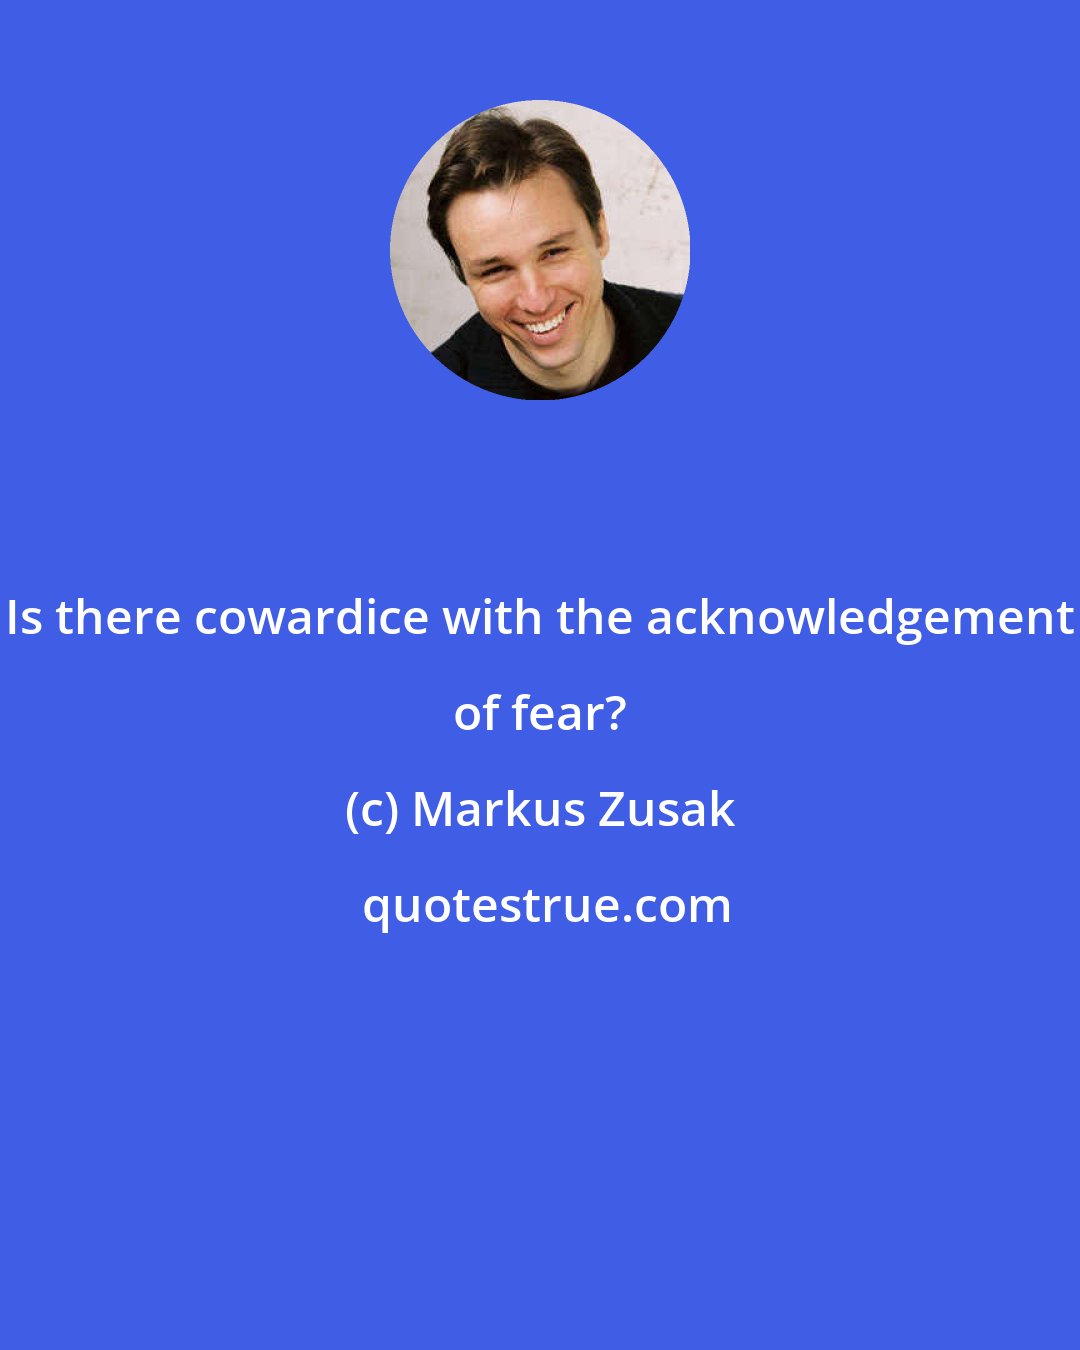 Markus Zusak: Is there cowardice with the acknowledgement of fear?